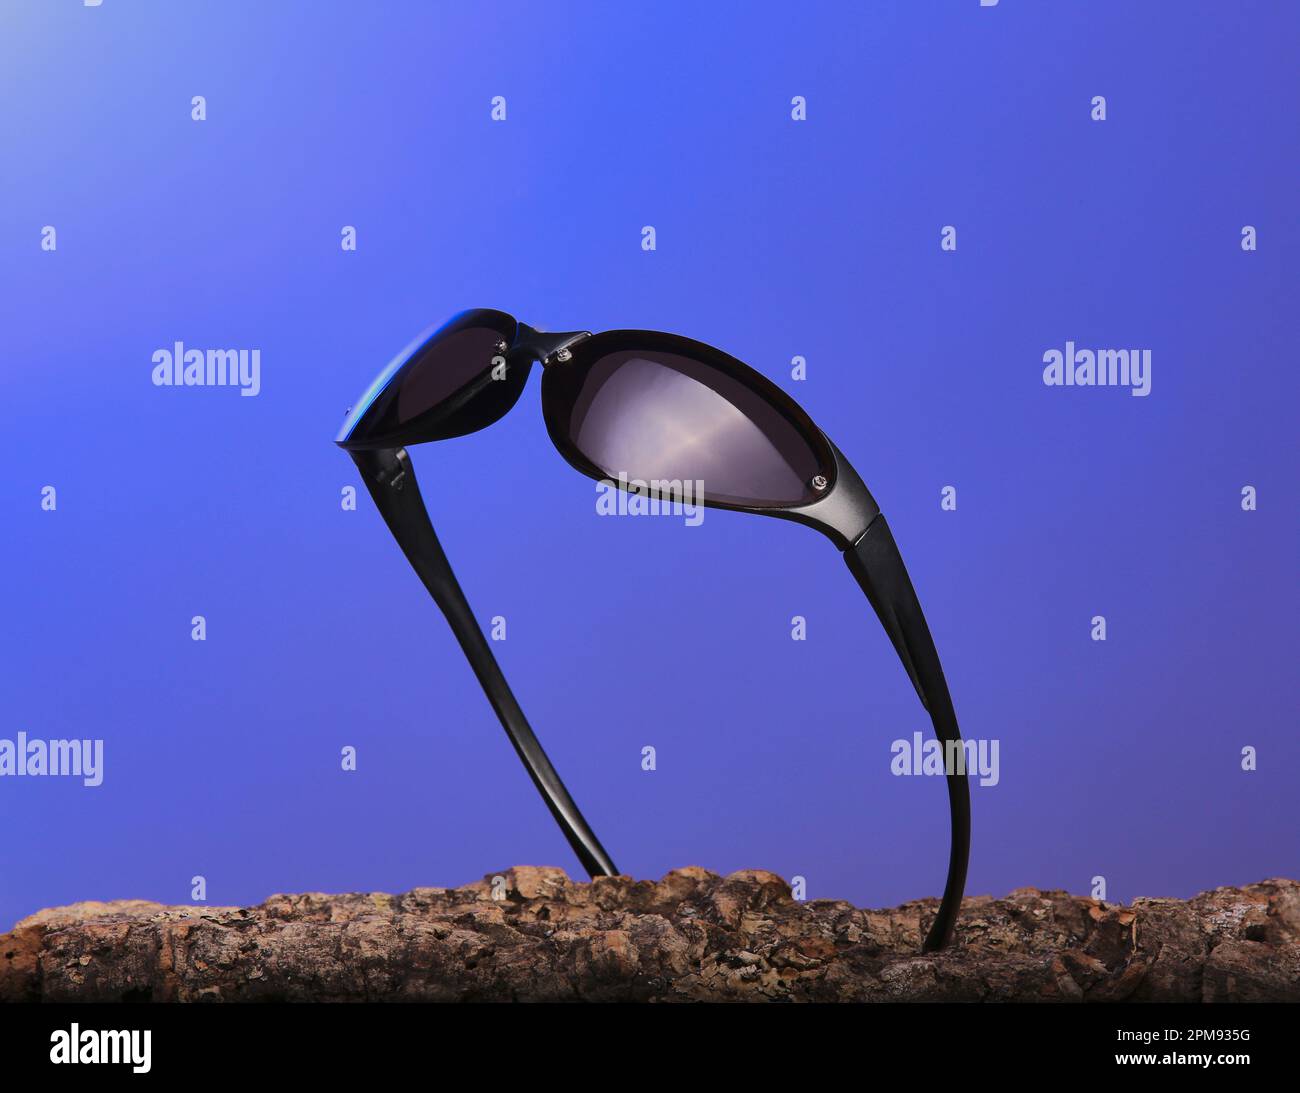 Pair of cool polarised sunglasses with a nice gradient on the lenses. Stock Photo